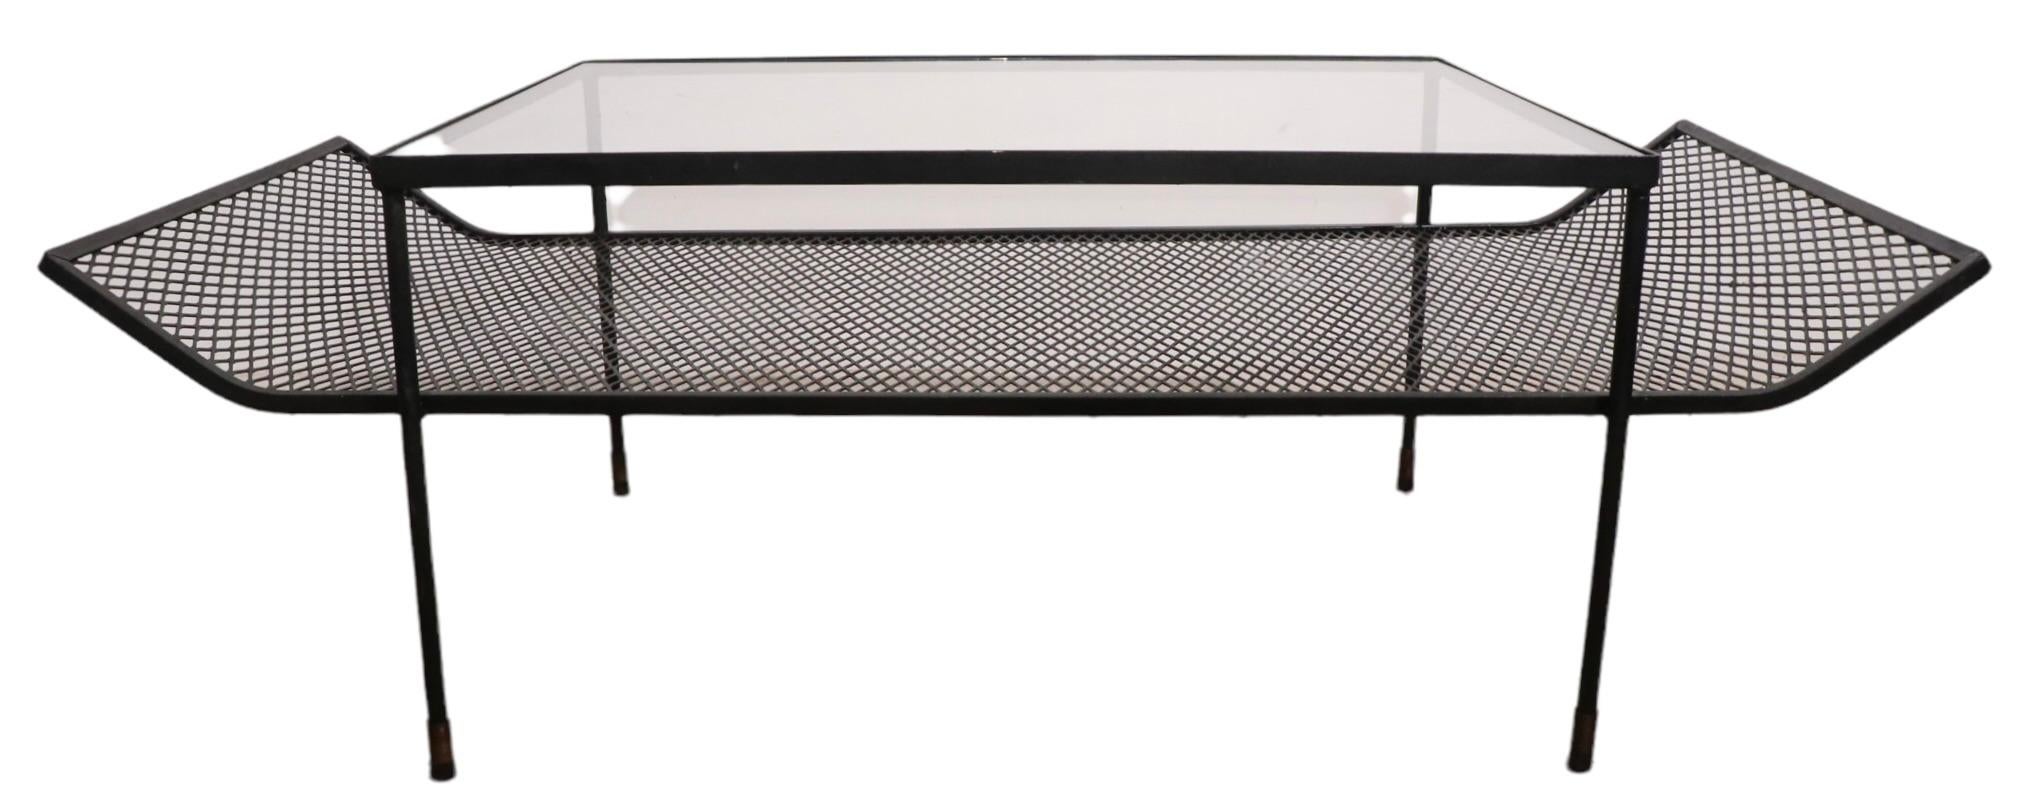  Architectural Mid-Century Wrought Iron and Glass Coffee Table Att. to Woodard  For Sale 3